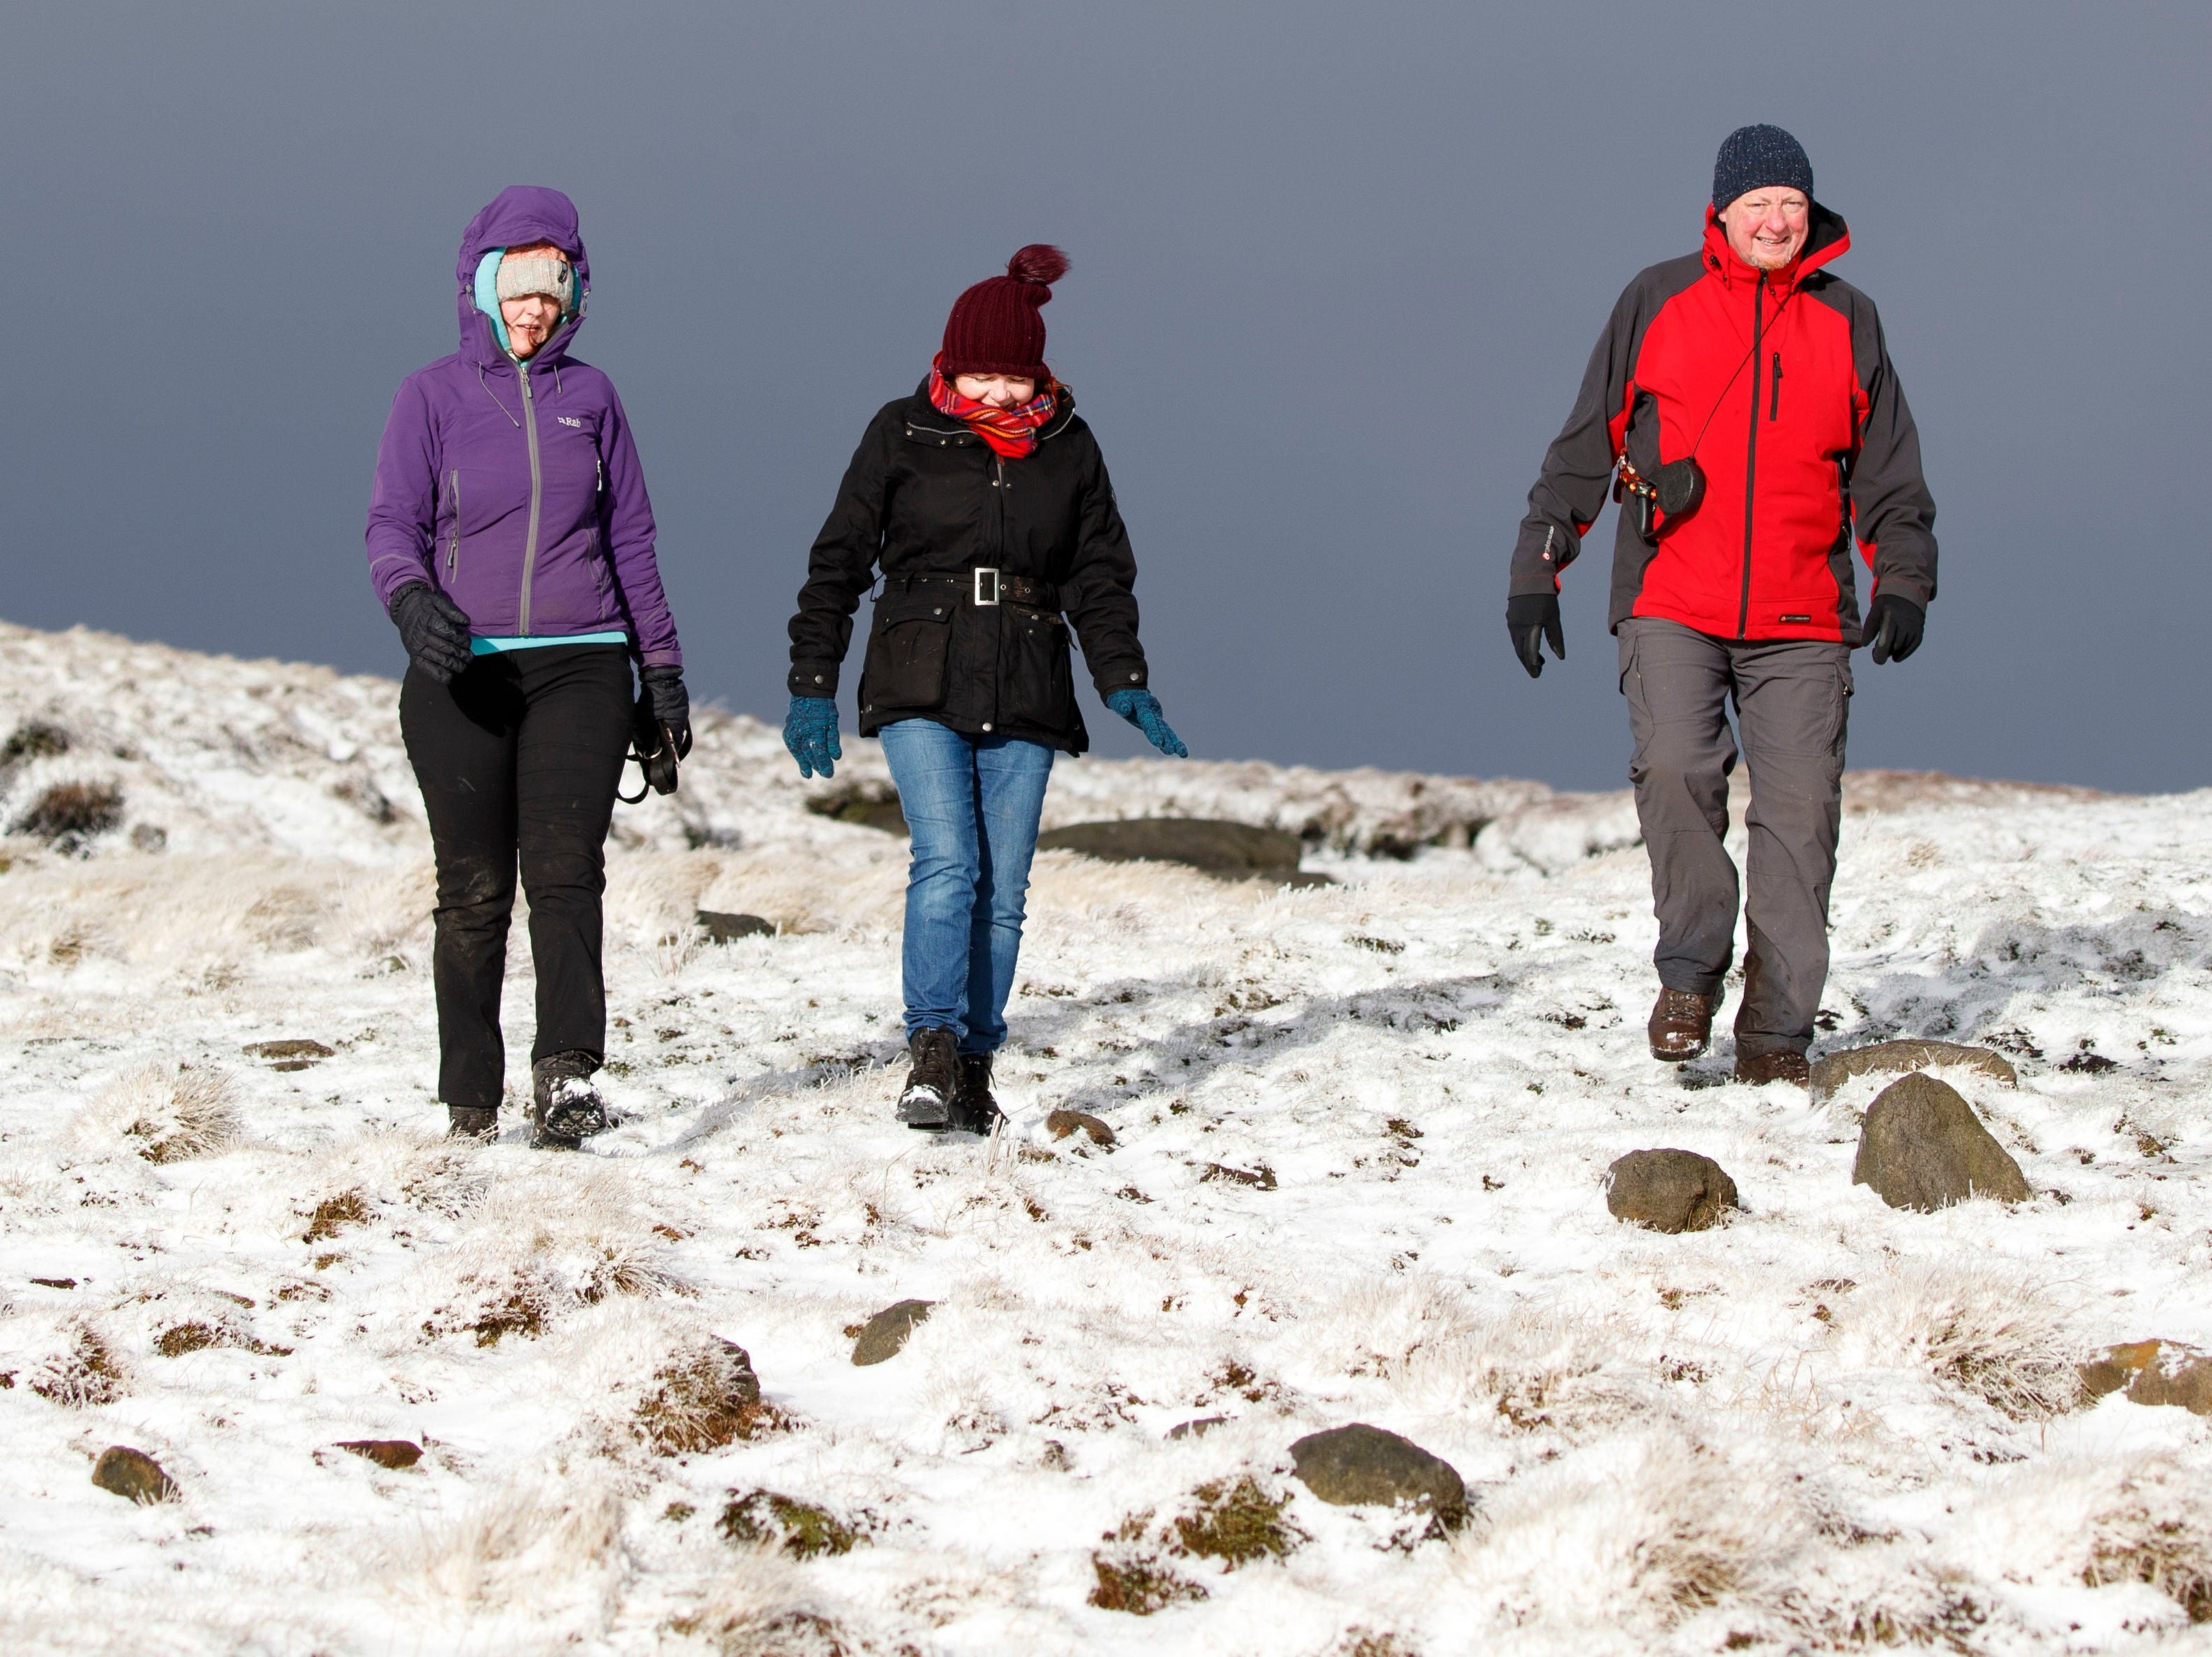 Hikers trudge through snow in the Peak District in Derbyshire